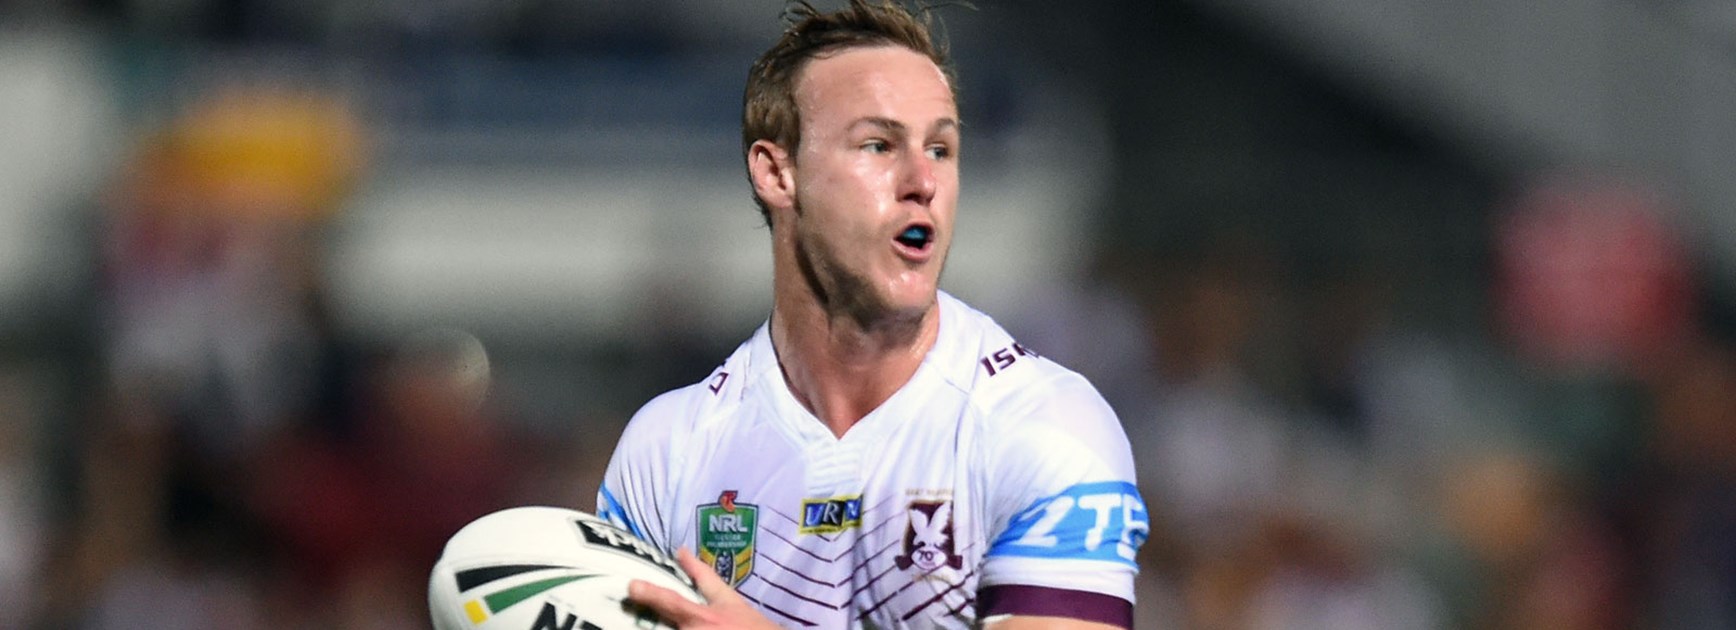 Sea Eagles halfback Daly Cherry-Evans scored a try in Manly's loss to North Queensland in Round 16.